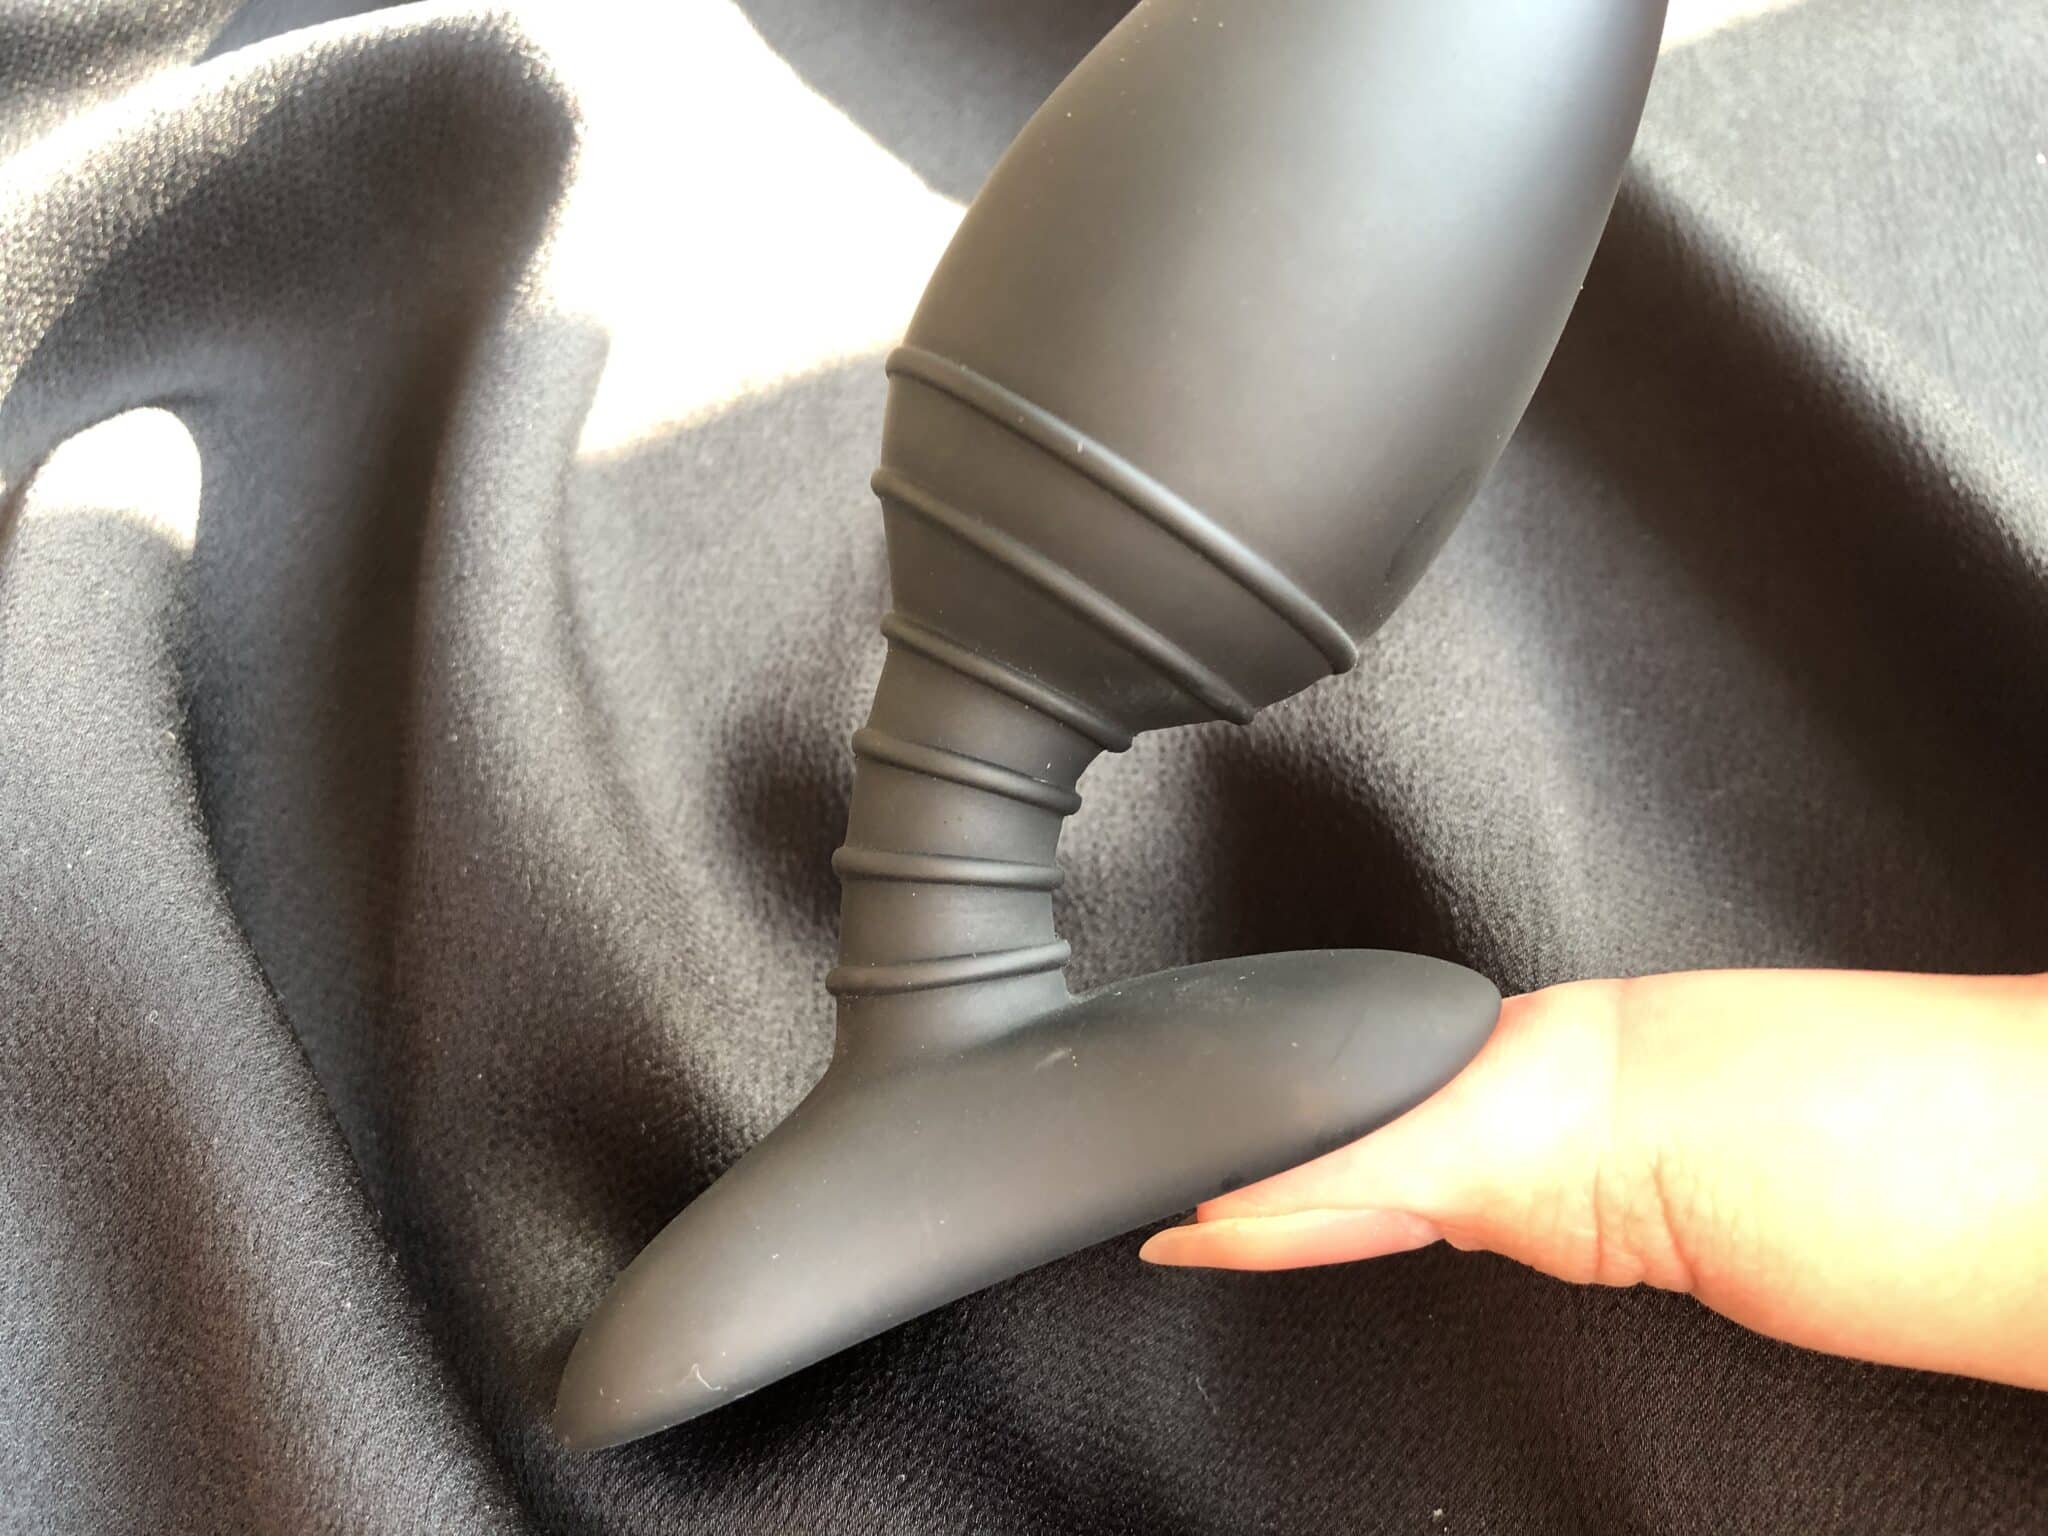 Nexus Ace Vibrating Butt Plug Reviewing the Material Choices and Care Guidelines